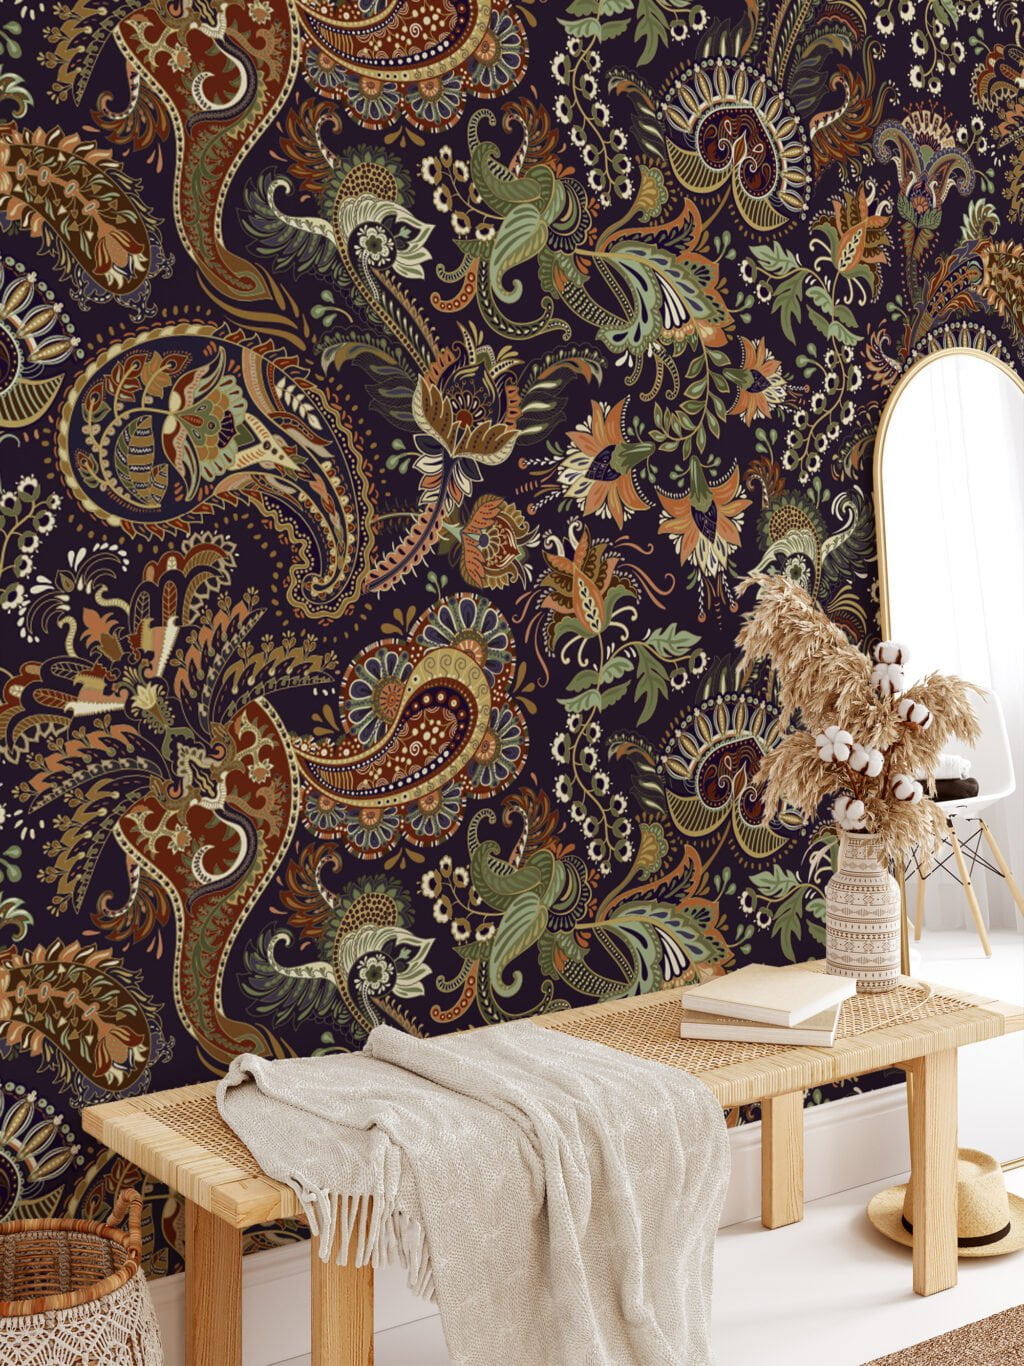 Earthy Traditional Floral Pattern with Dark Background Peel and Stick Wallpaper for a Cozy Home